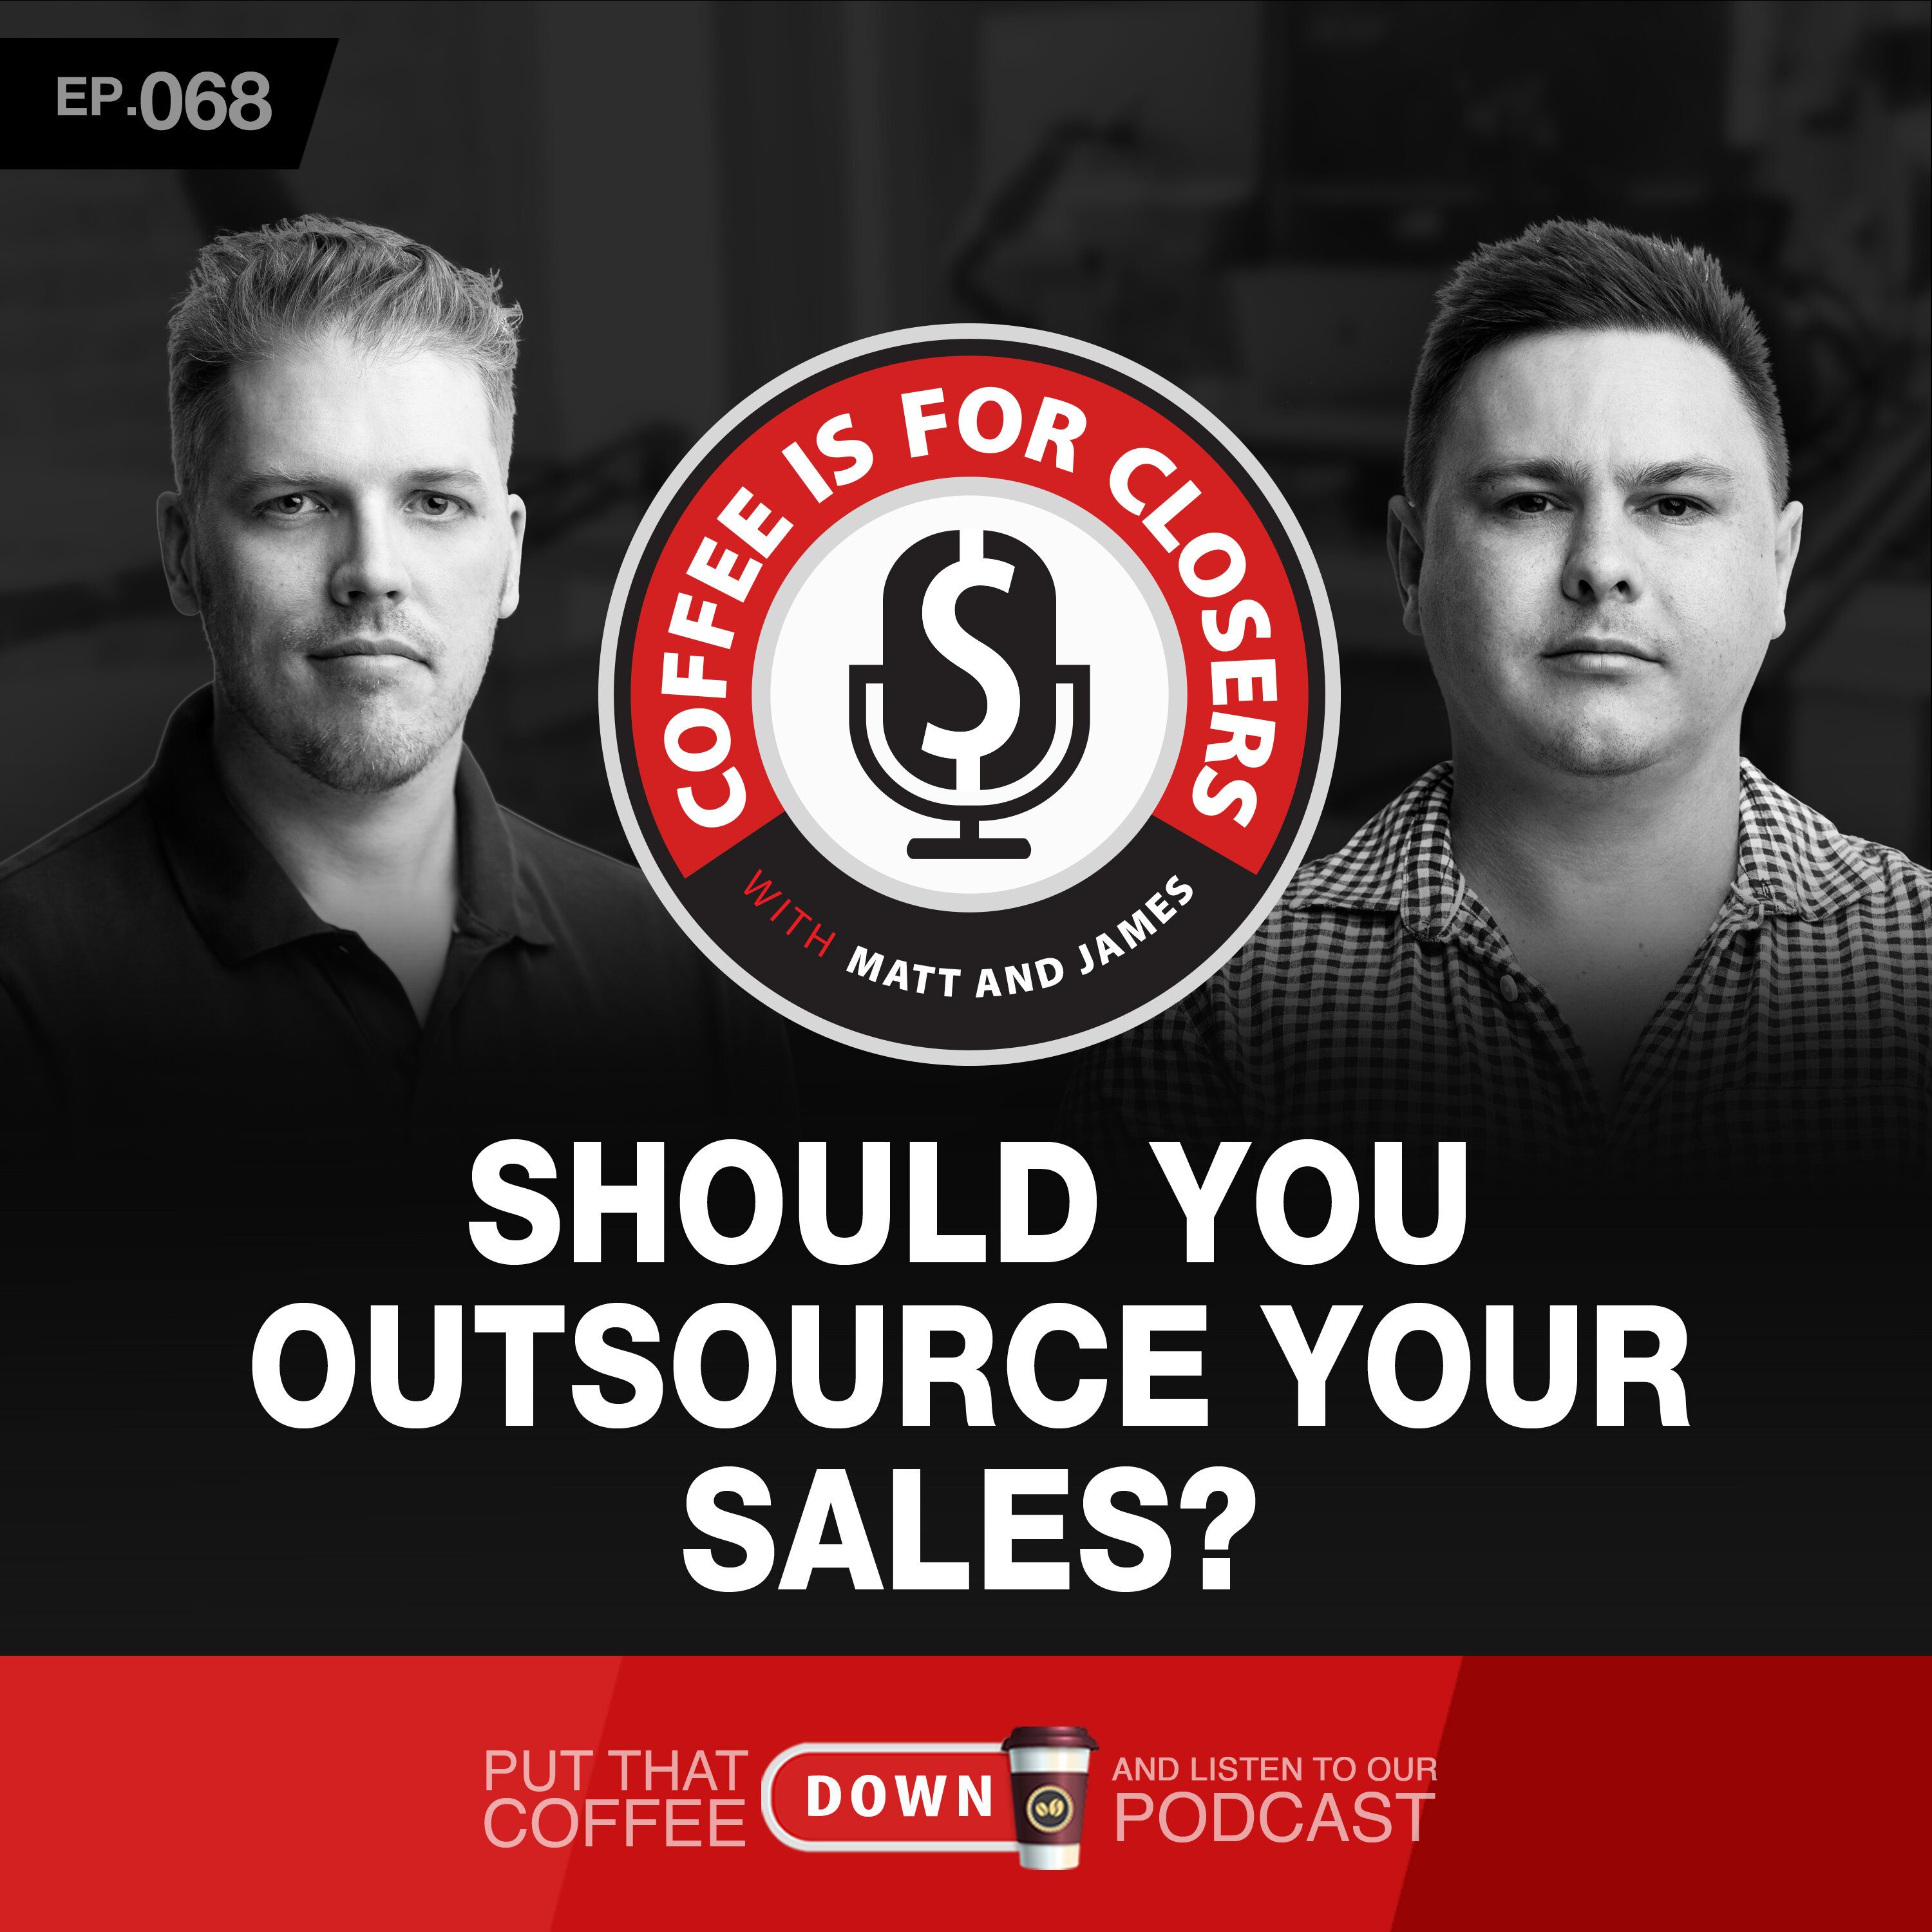 Should You Outsource Your Sales?